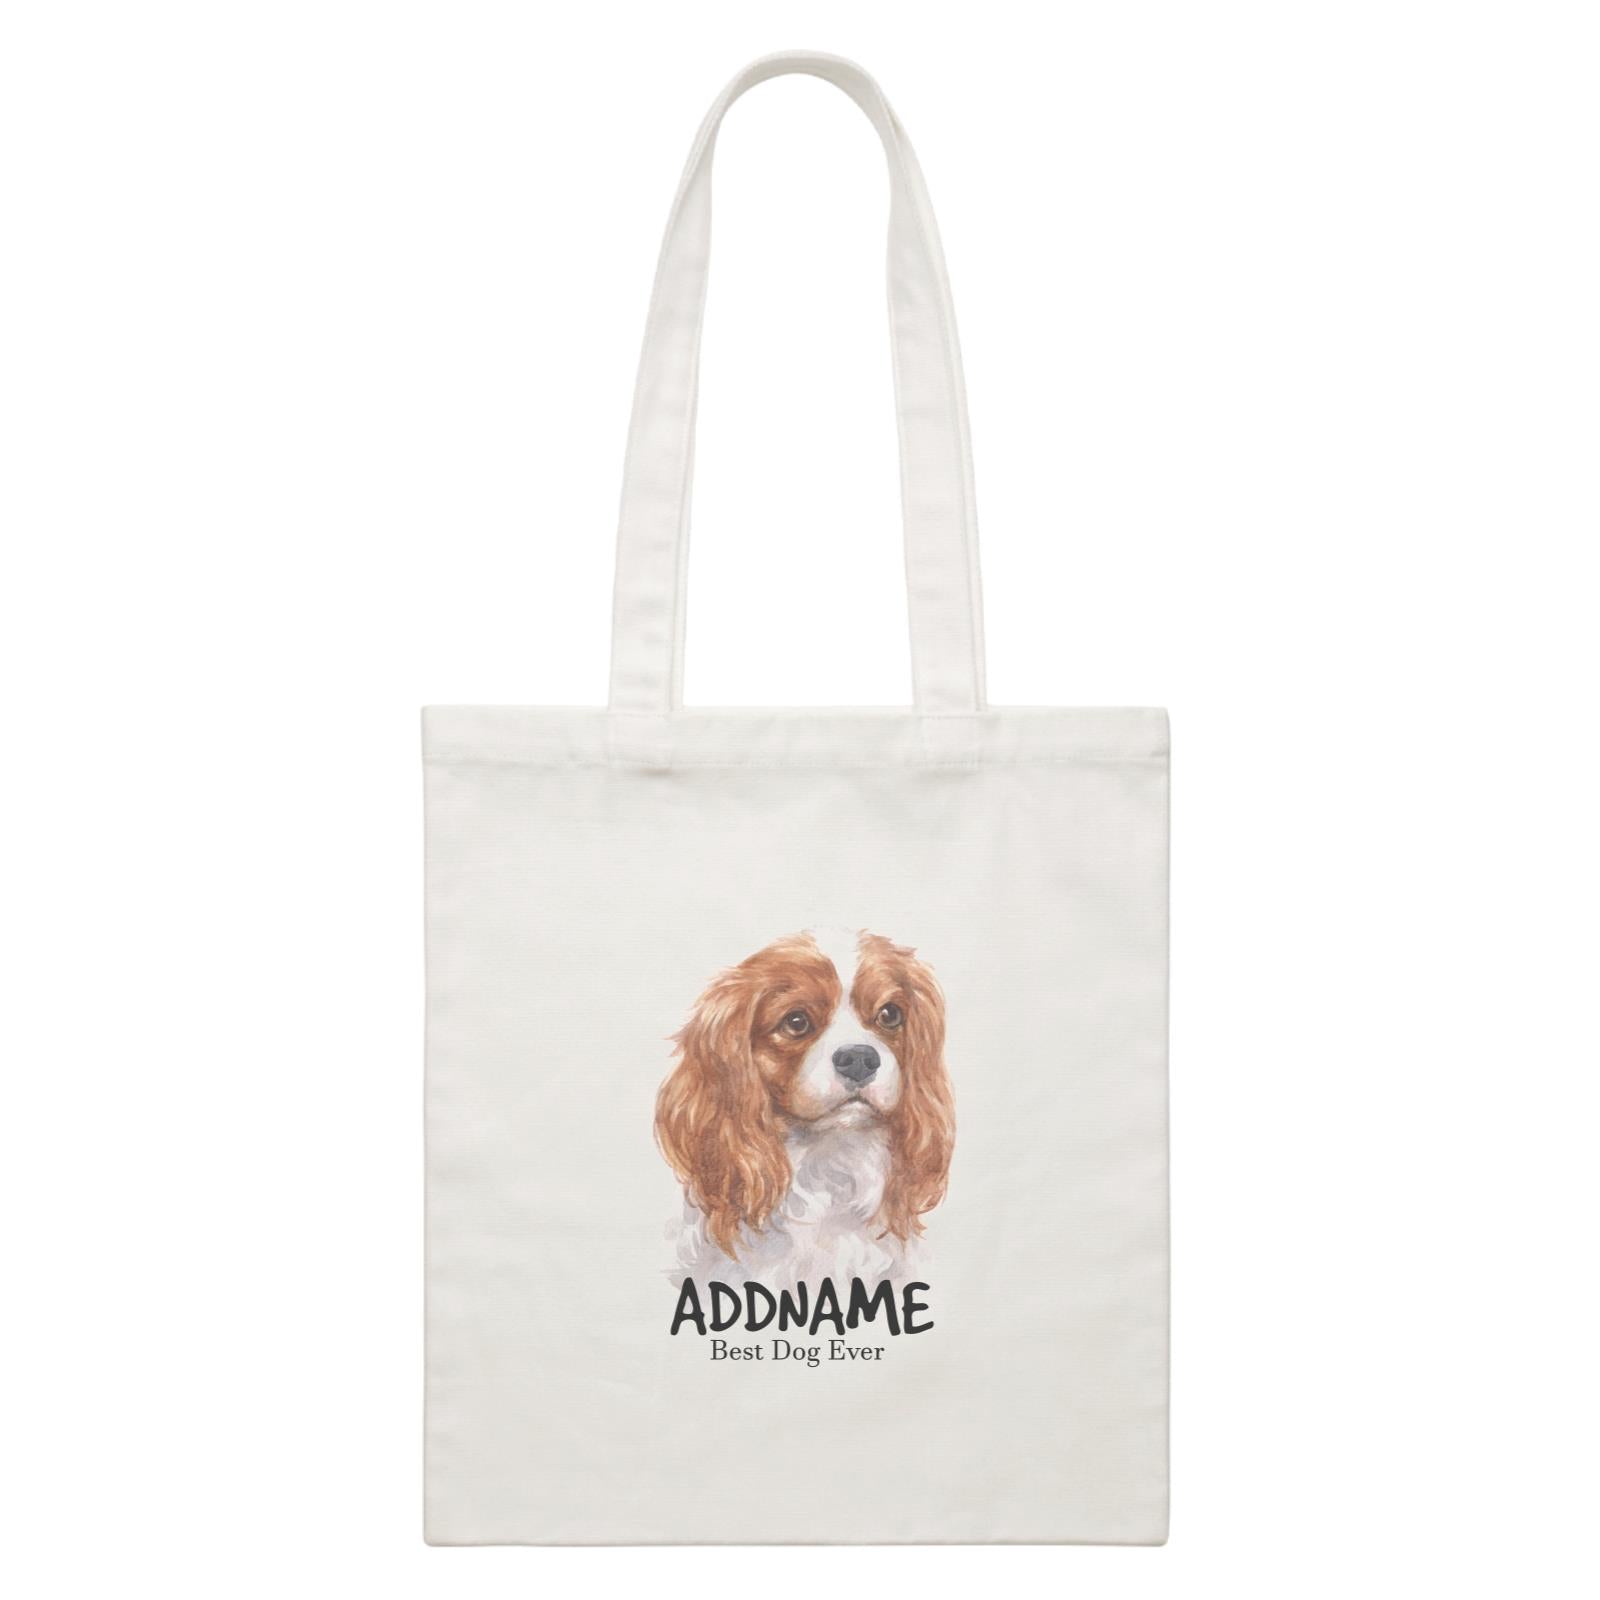 Watercolor Dog King Charles Spaniel Curly Best Dog Ever Addname White Canvas Bag